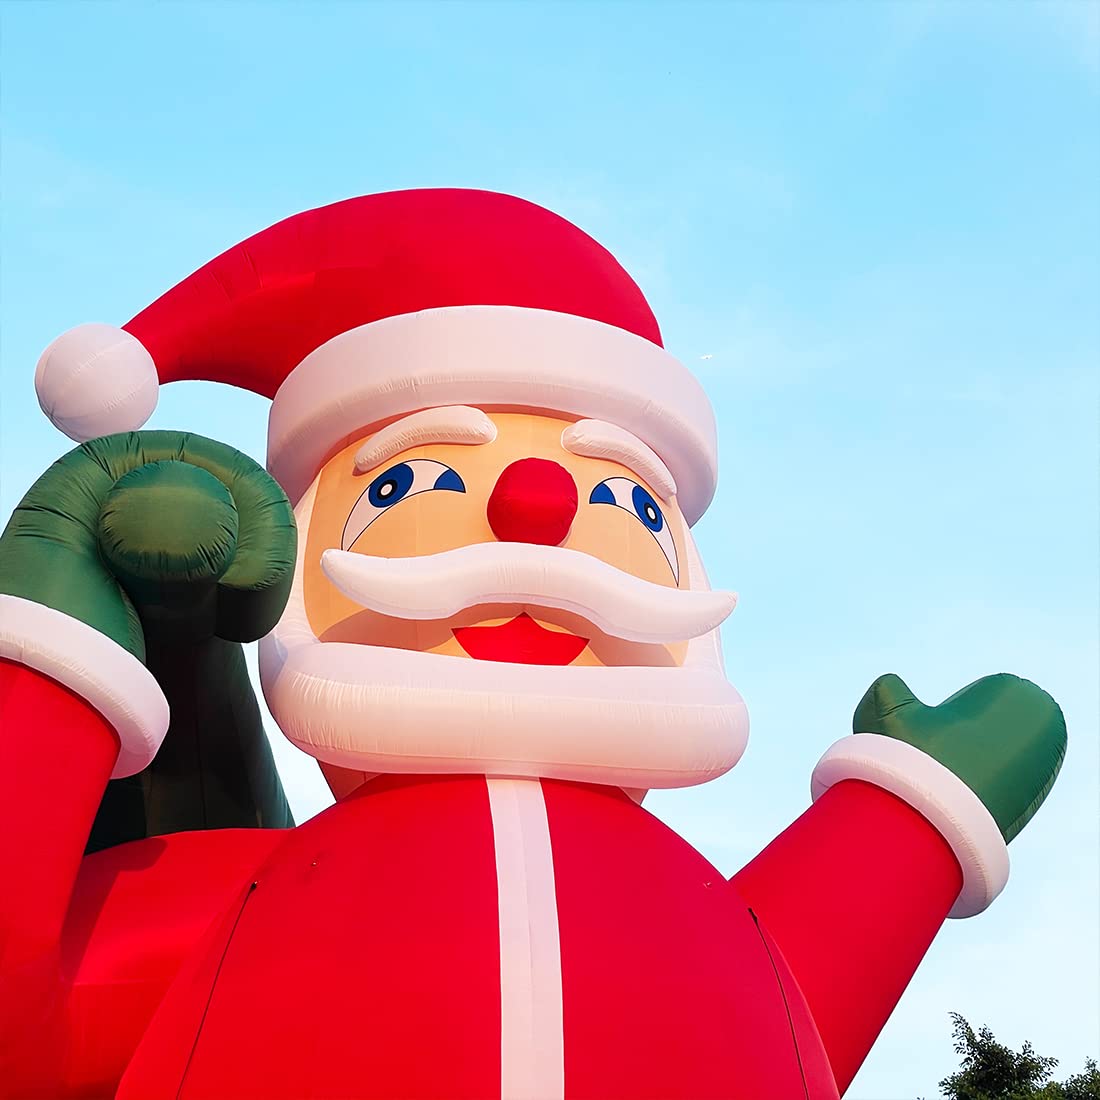 Giant 20Ft Premium Inflatable Santa Claus with Blower for Christmas Yard Decoration Outdoor Yard Lawn Xmas Party Blow Up Decoration with No Light